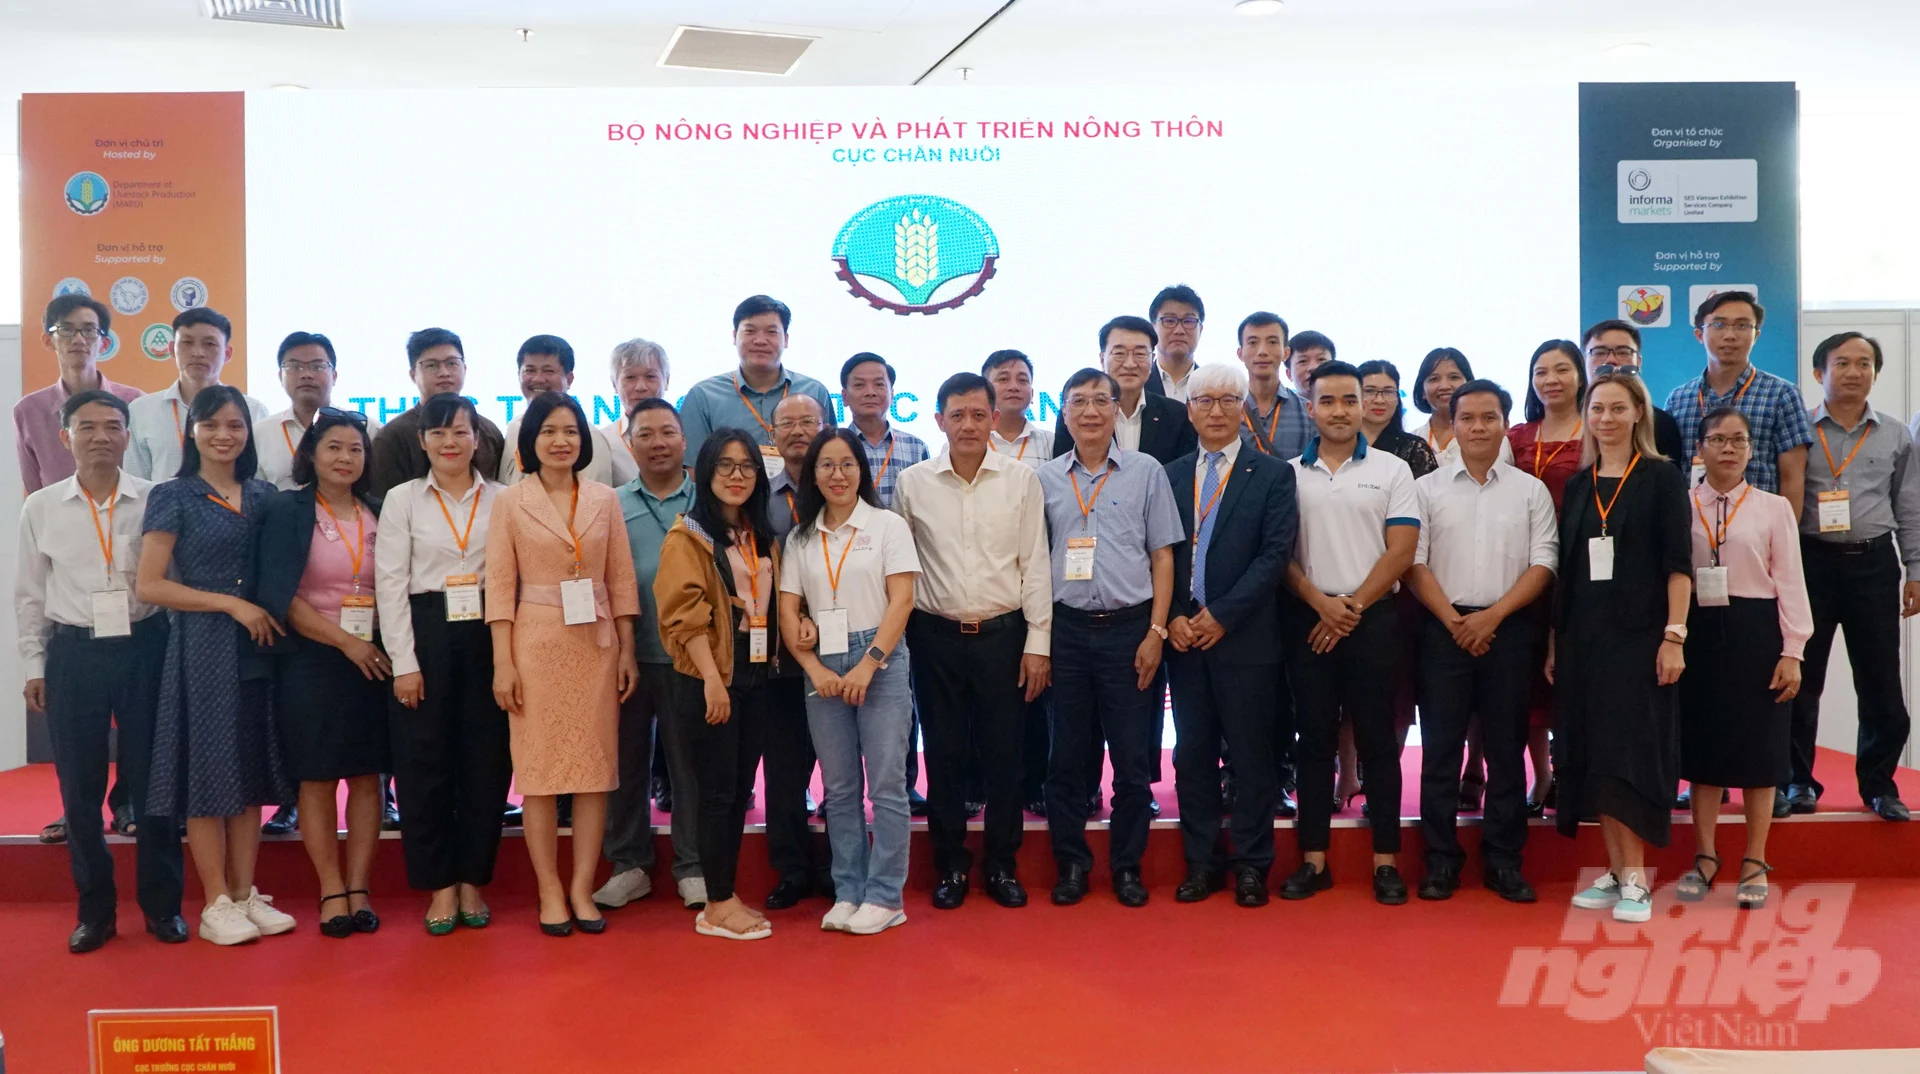 The conference on reducing greenhouse emissions in livestock production attracts many experts, managers and businesses nationwide. Photo: Le Binh.